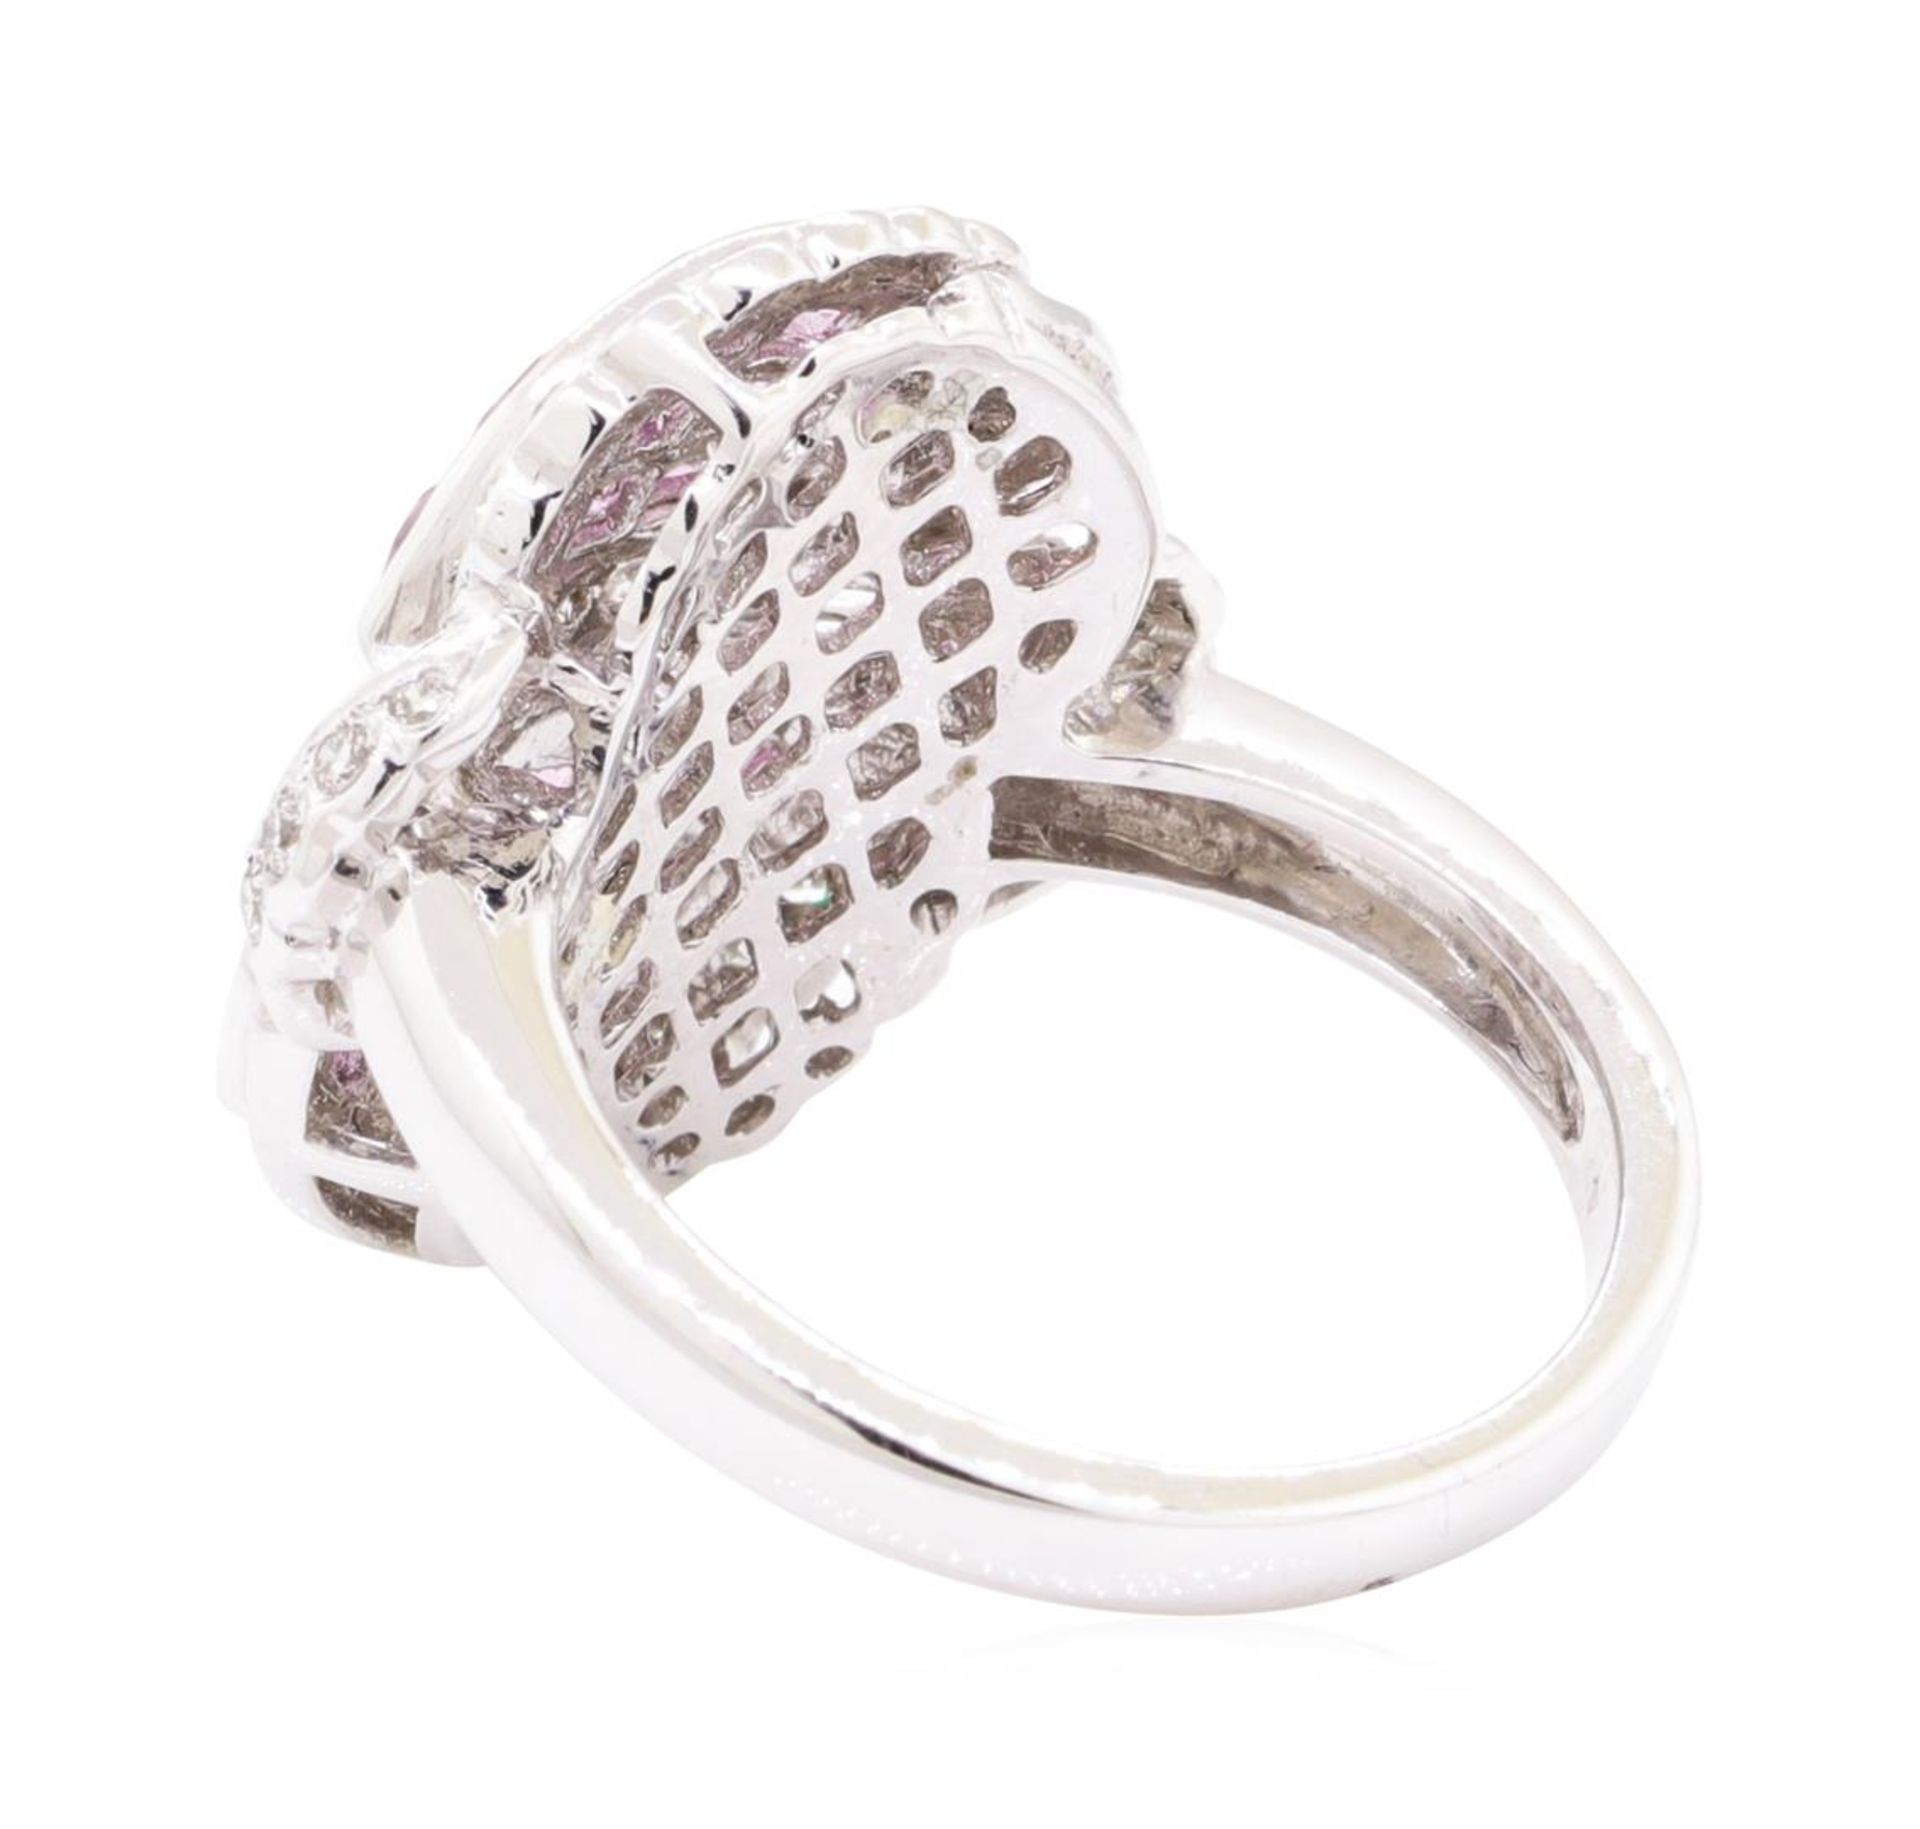 2.40 ctw Pink Sapphire And Diamond Ring - 18KT White Gold - Image 3 of 5